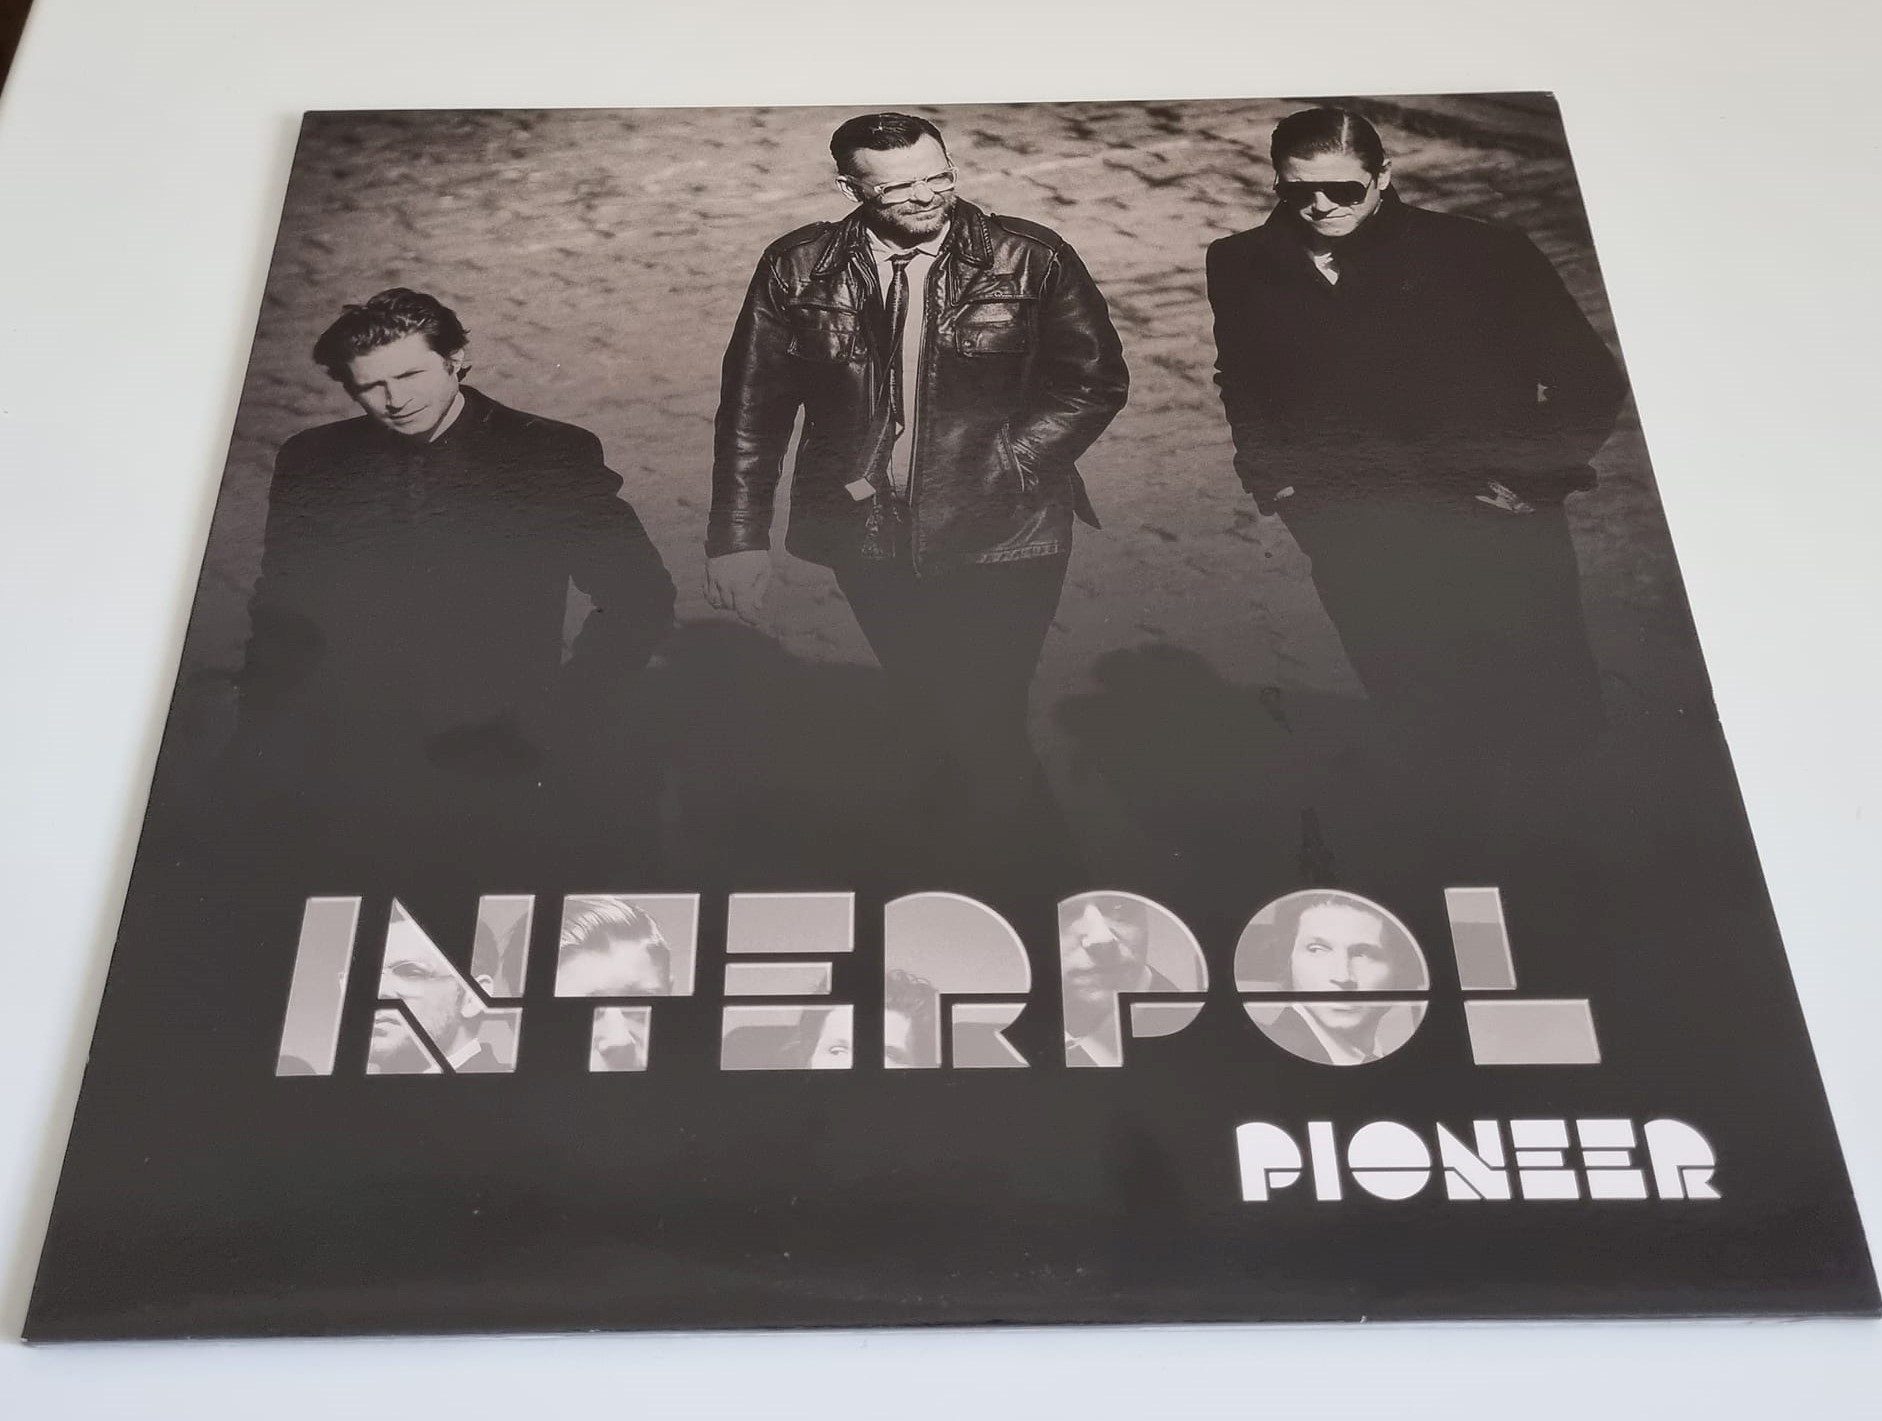 Buy this rare Interpol record by clicking here